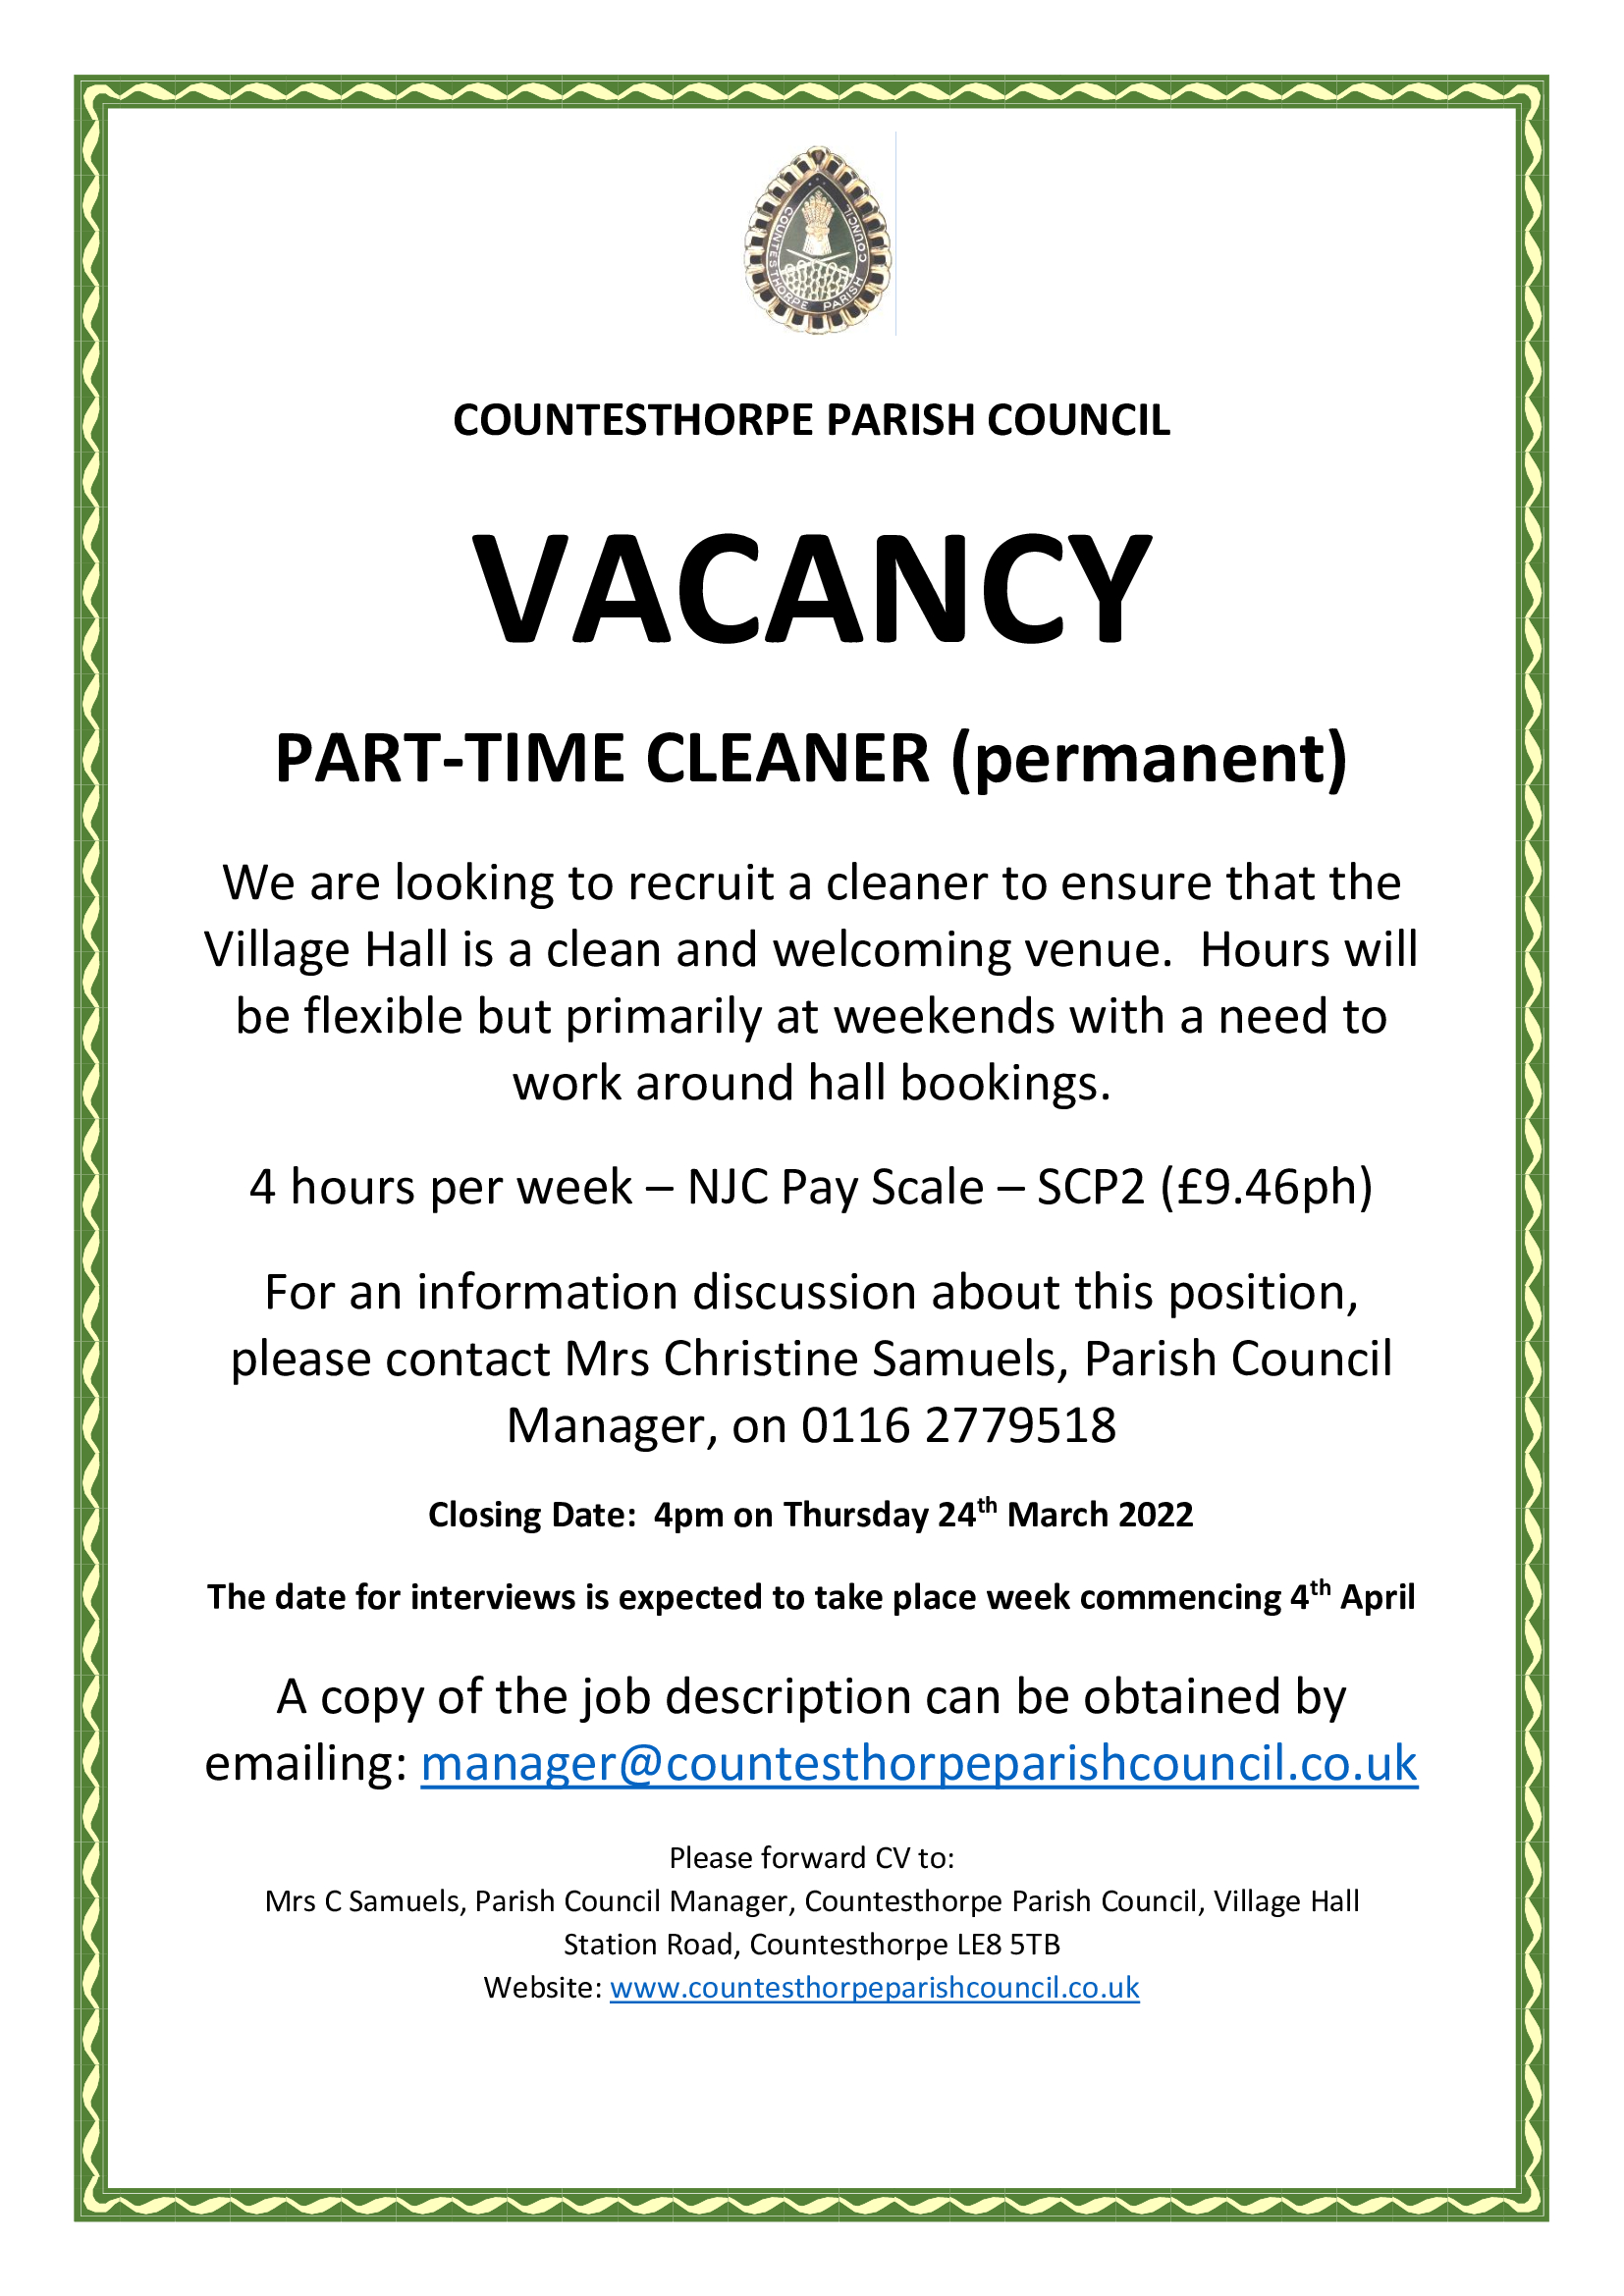 Vacancy for Village Hall Cleaner